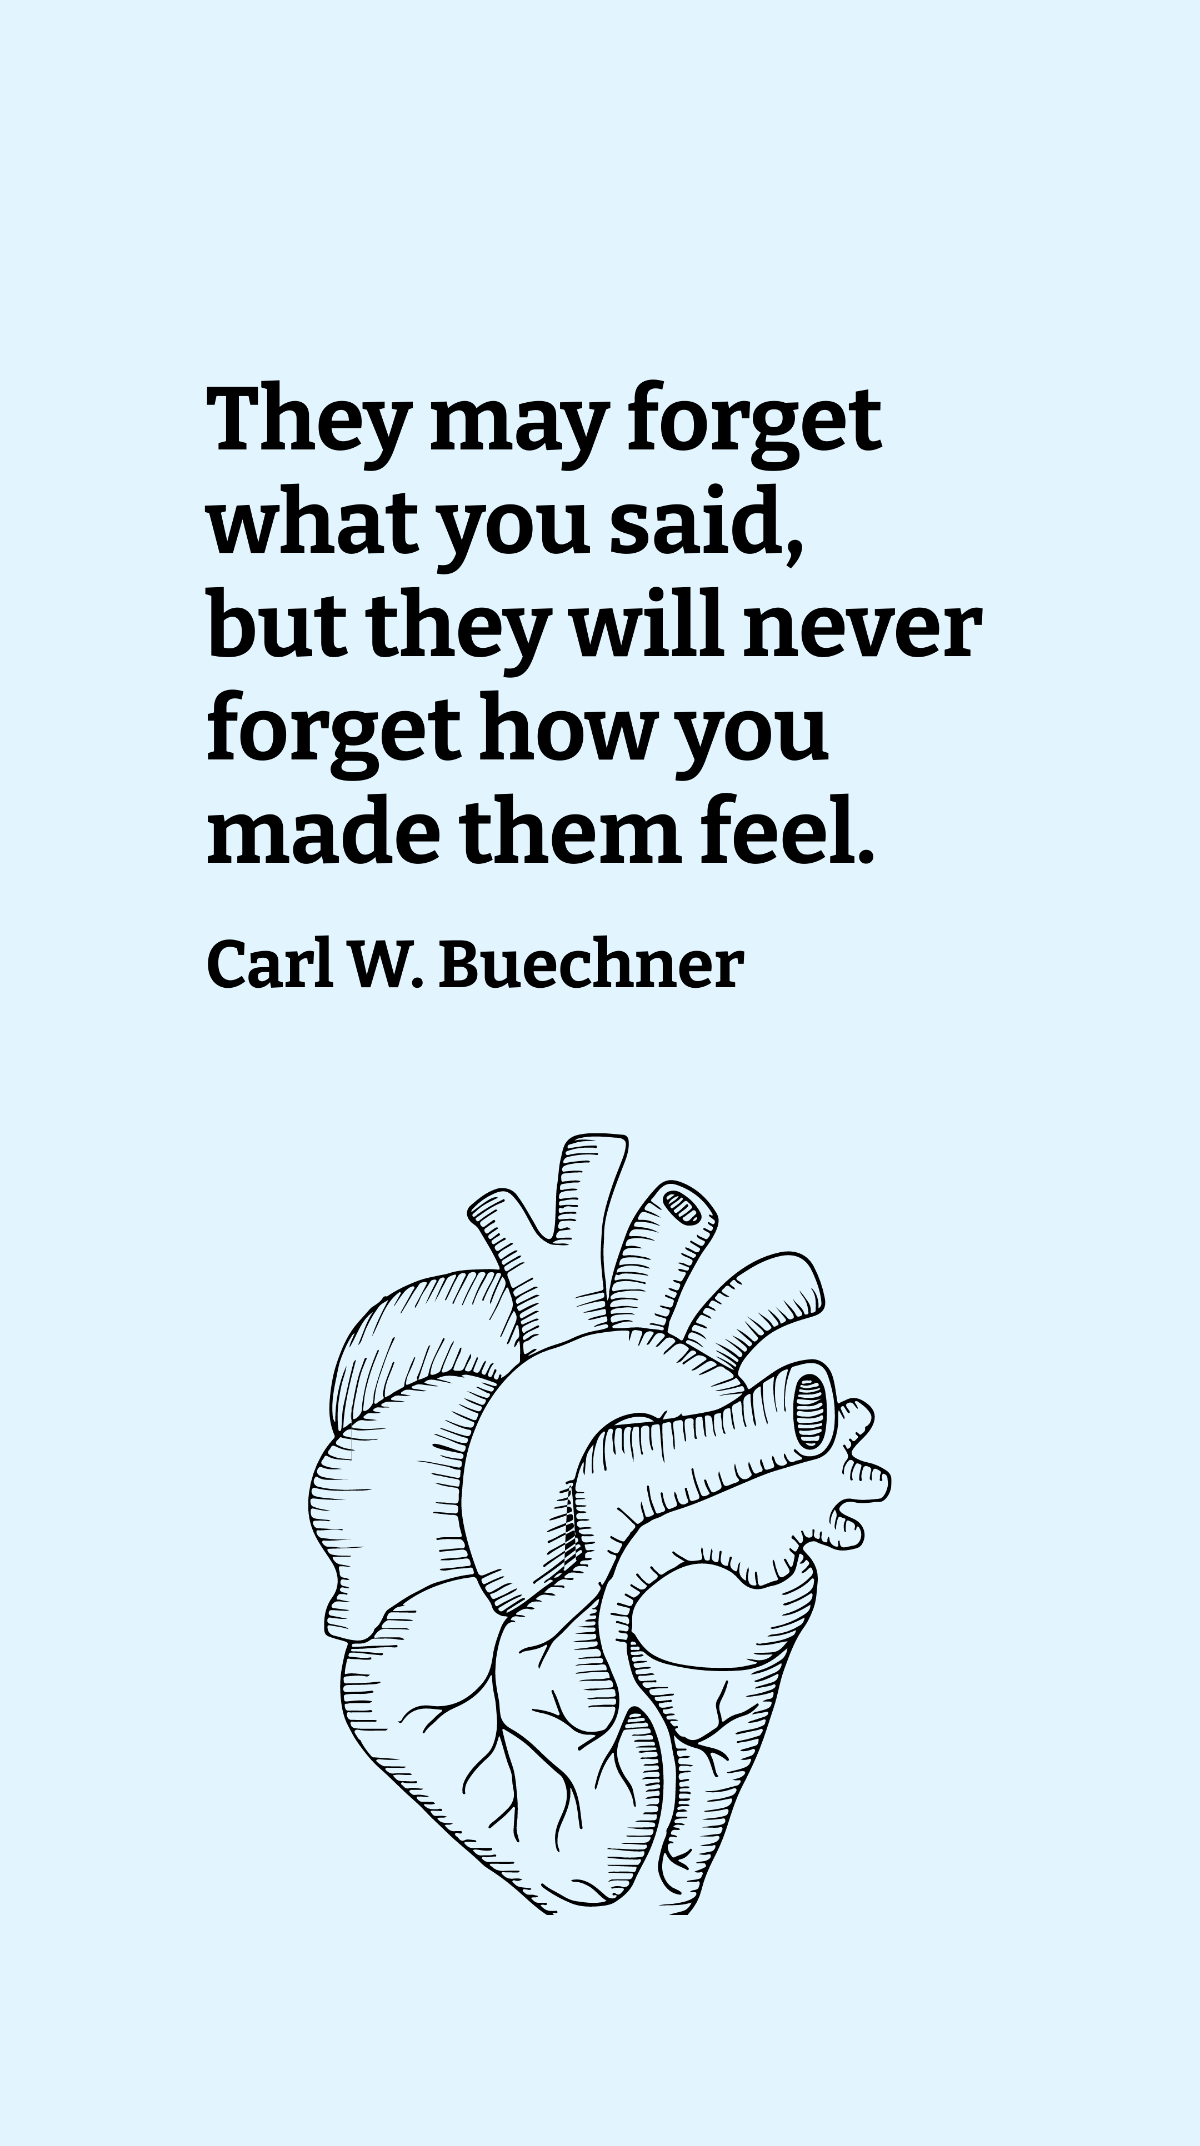 Carl W. Buechner -They may forget what you said, but they will never forget how you made them feel. Template